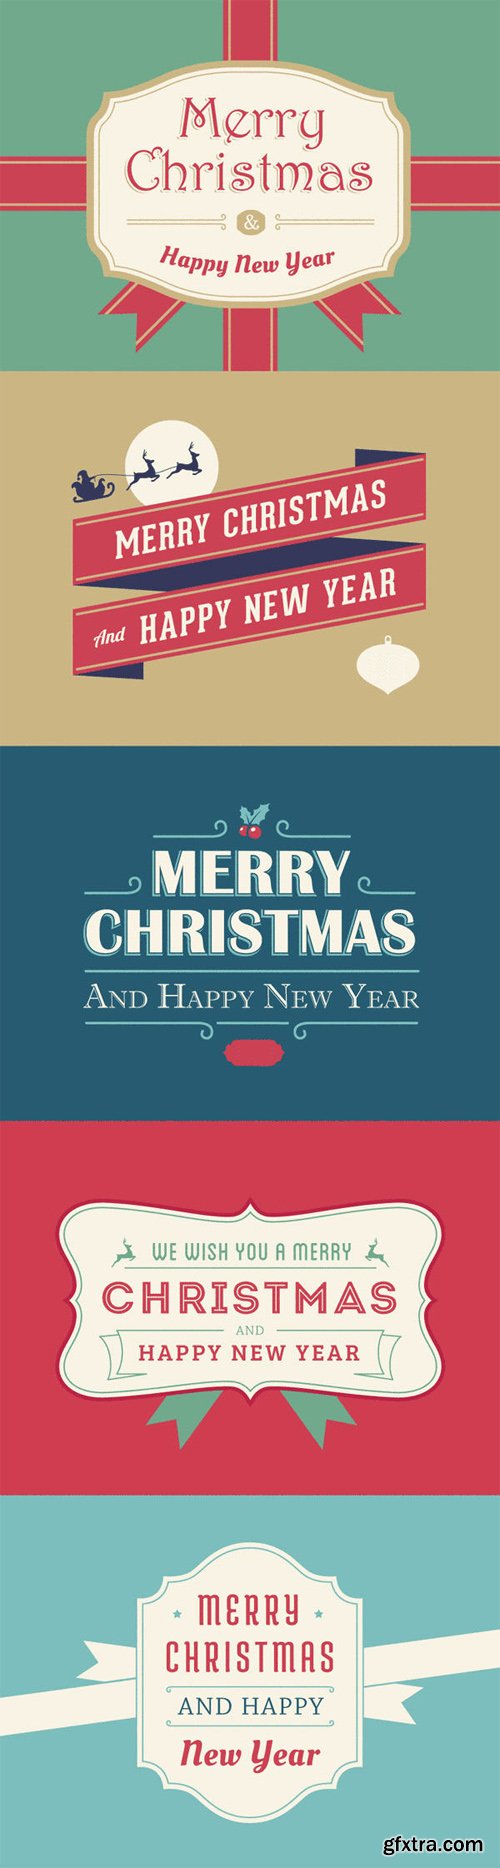 5 Christmas And New Year Cards (PSD / AI / EPS / PNG) [Re-Up]